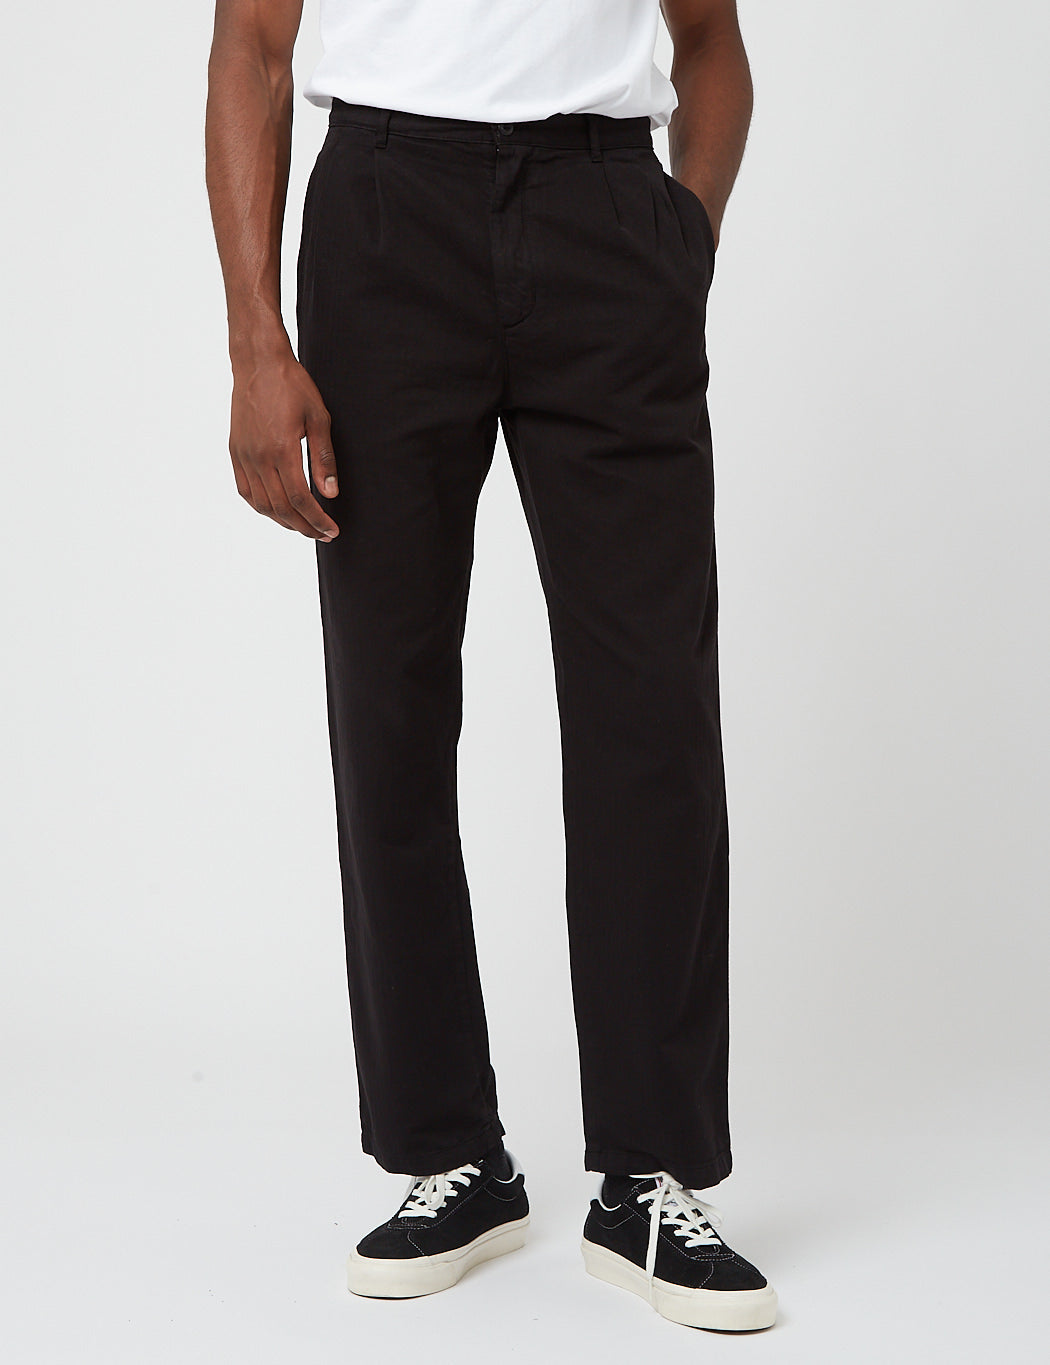 Carhartt-WIP Salford Pant (Relaxed Fit) - Black | URBAN EXCESS.